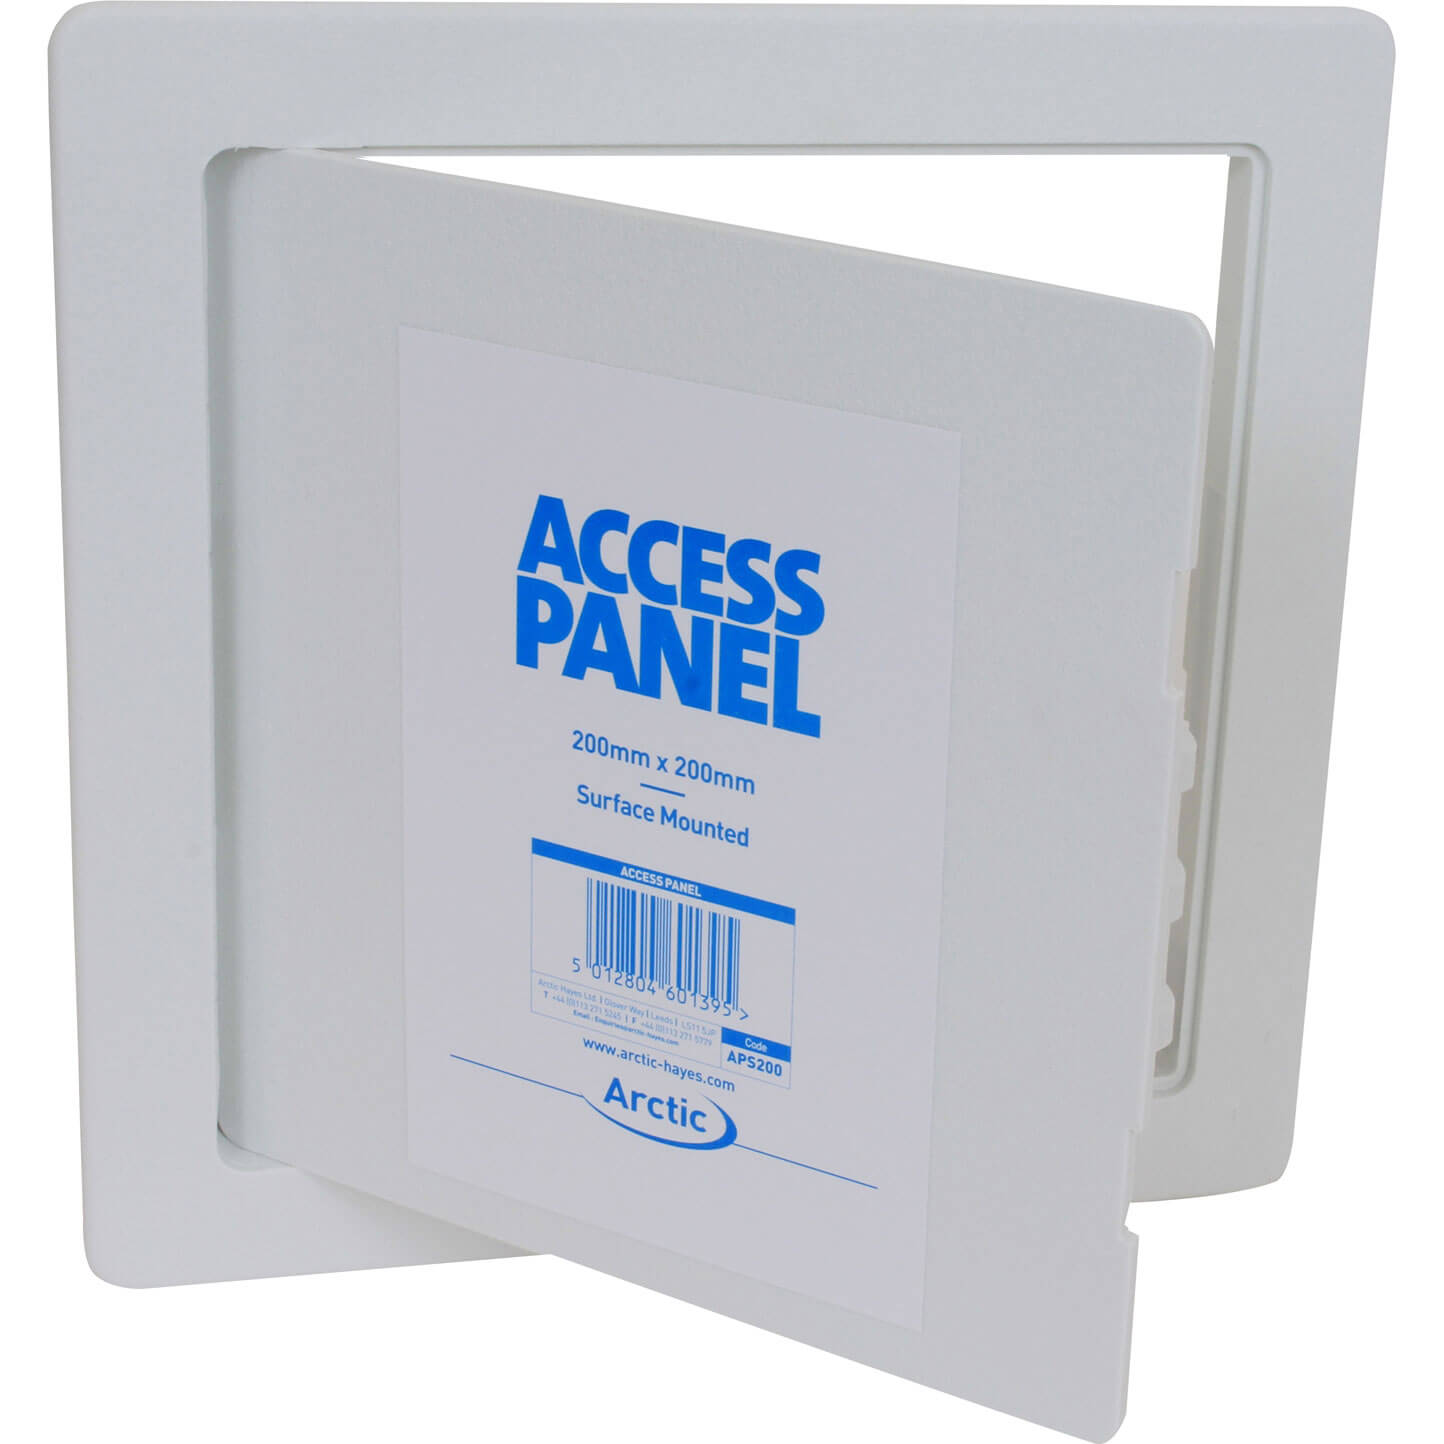 Image of Arctic Hayes Access Panel 200mm 200mm